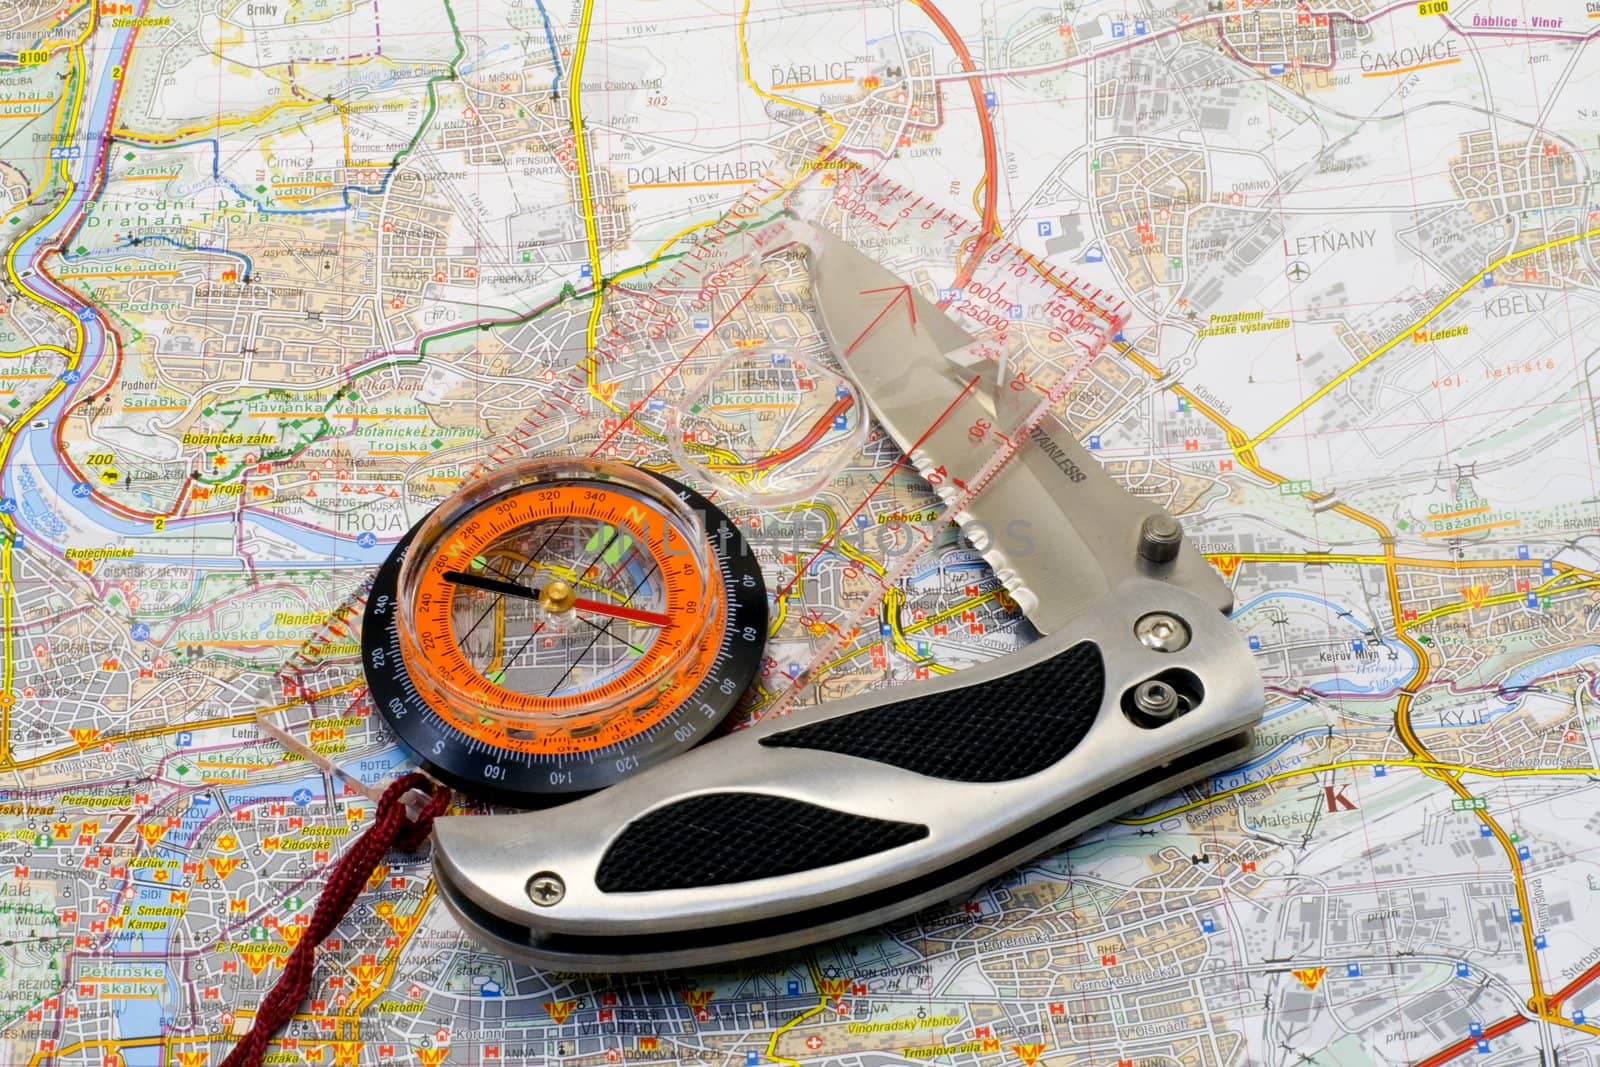 a compass and a knife lying on a map - close up